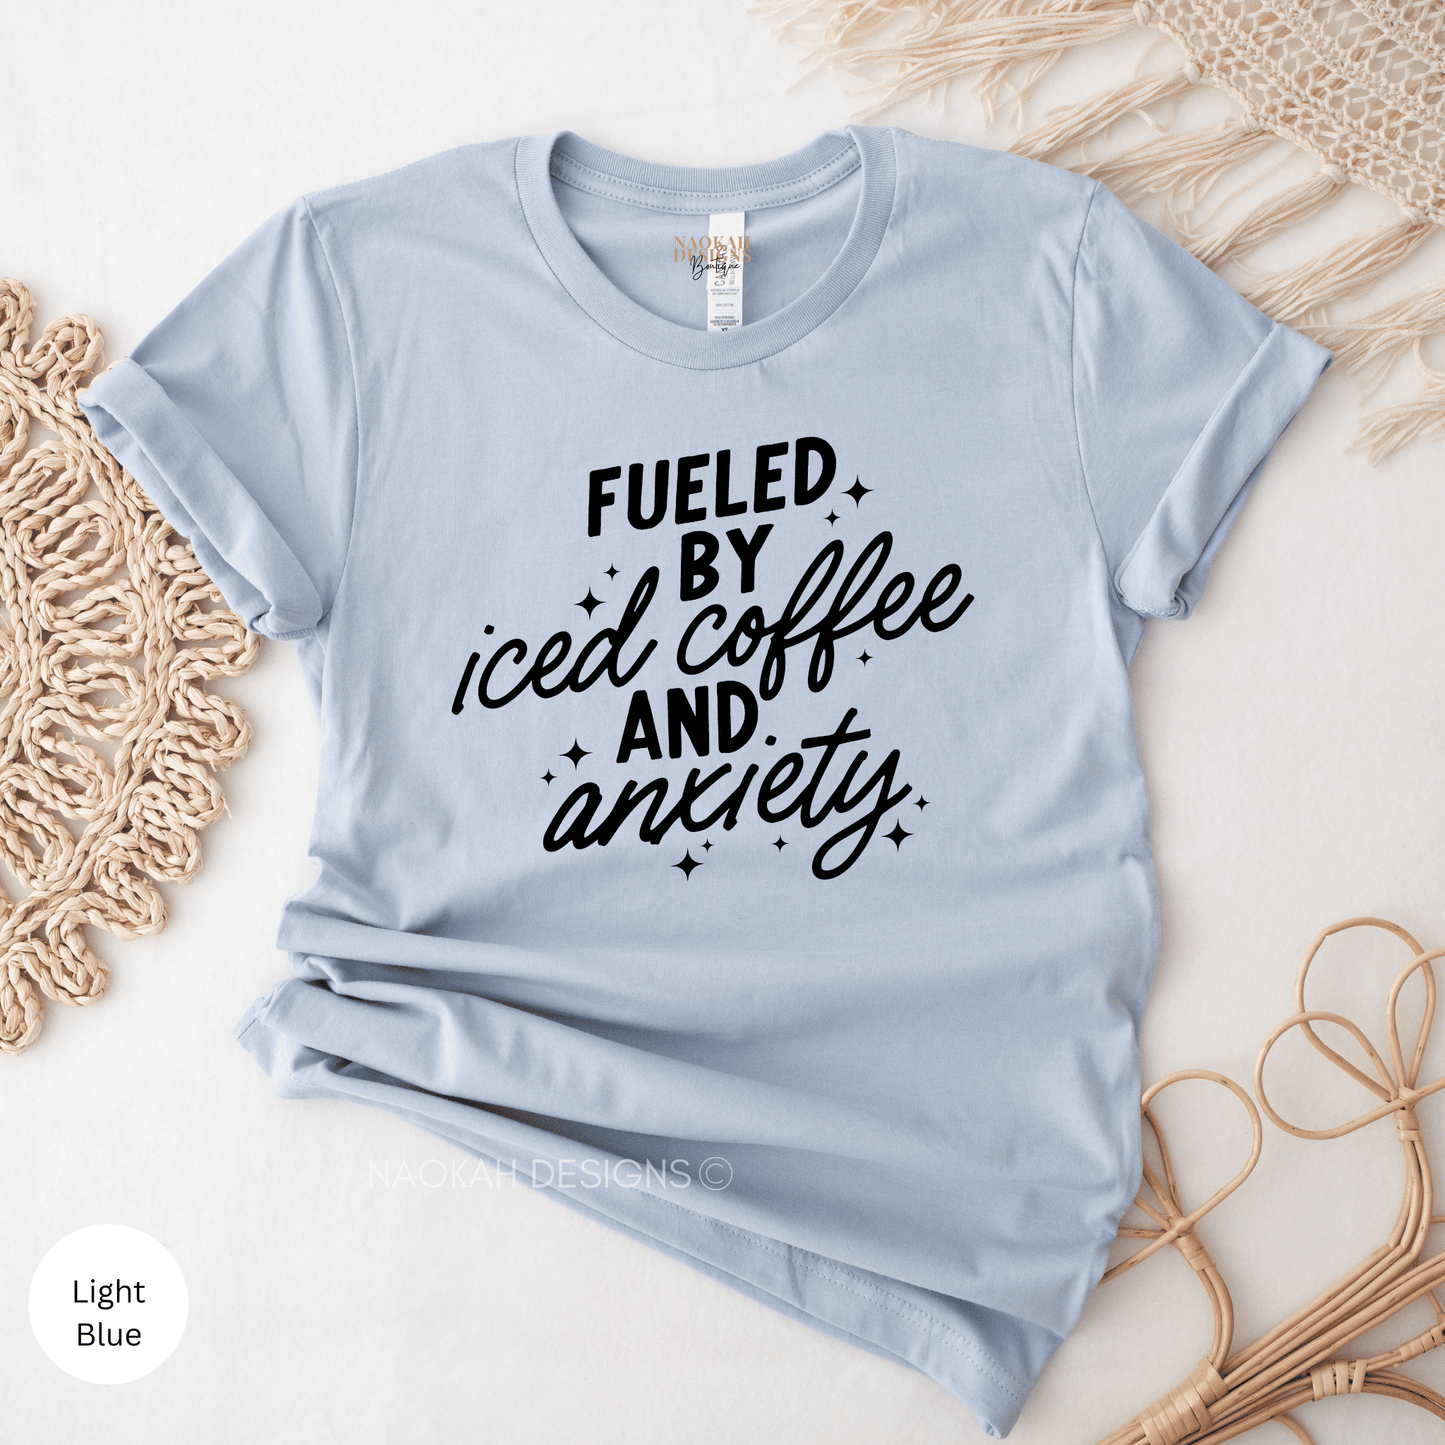 fueled by iced coffee and anxiety shirt, iced coffee addict shirt, mental health shirt, anxiety shirt, overstimulated moms club shirt